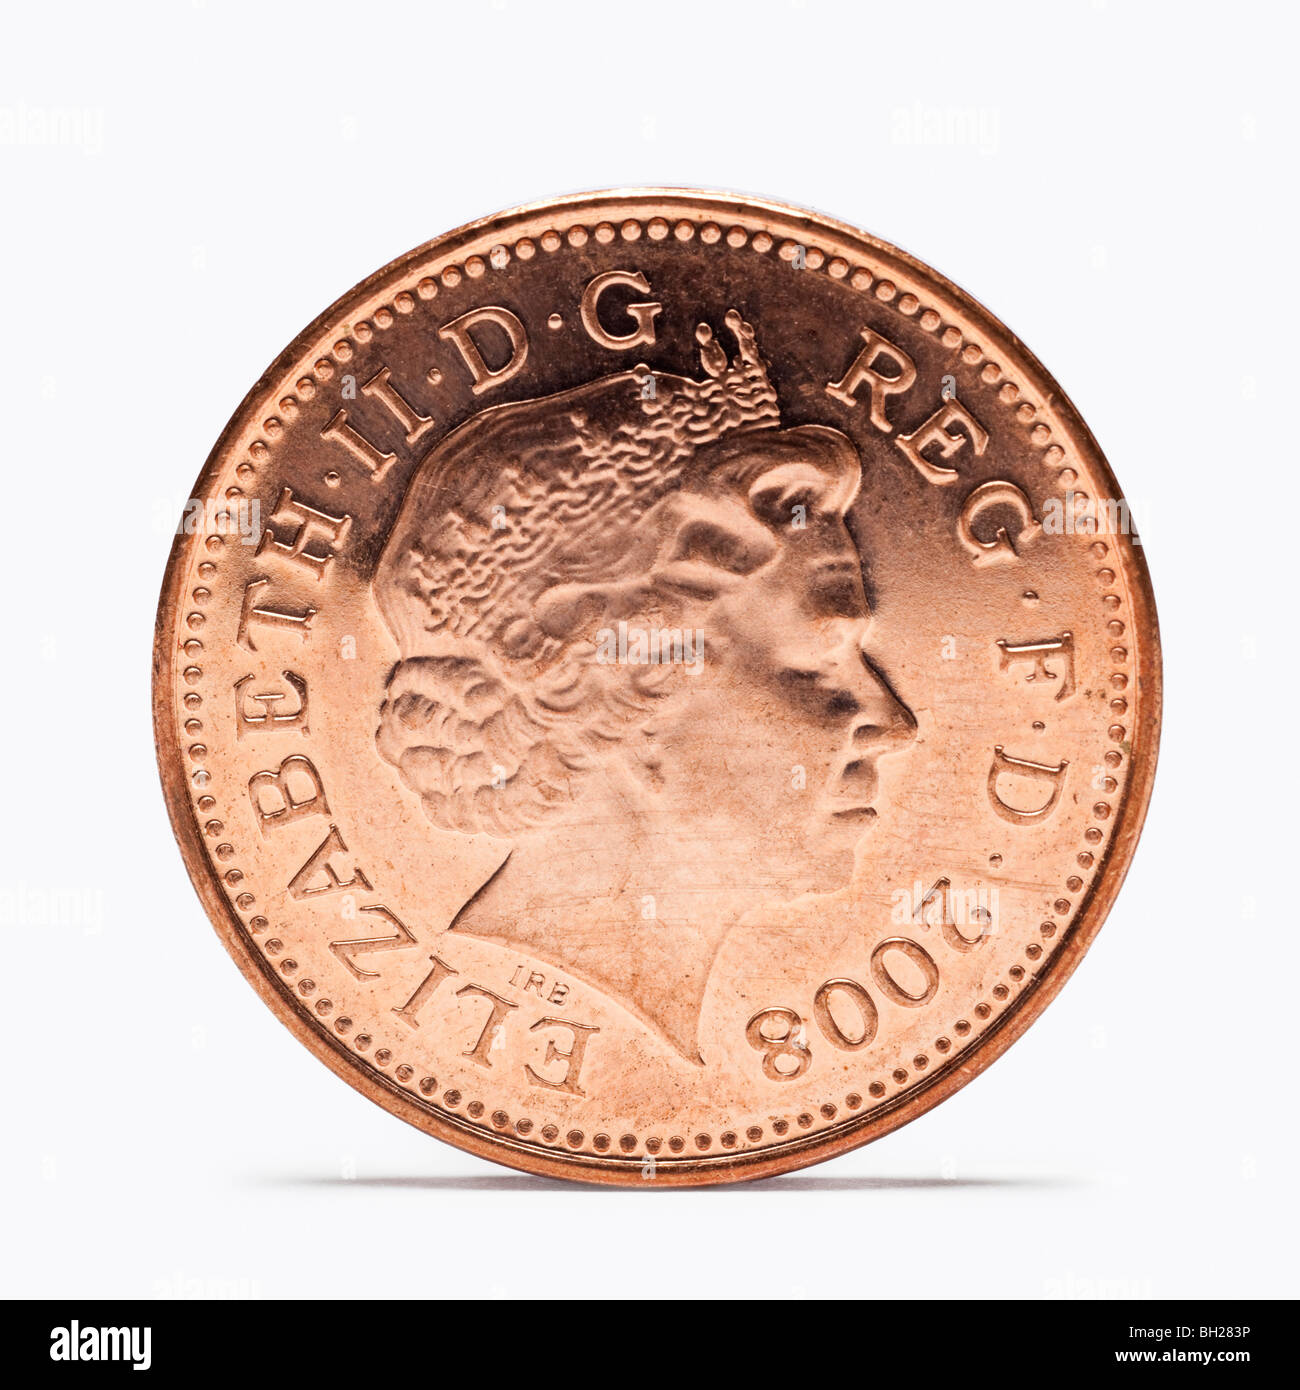 British One penny coin front view Stock Photo